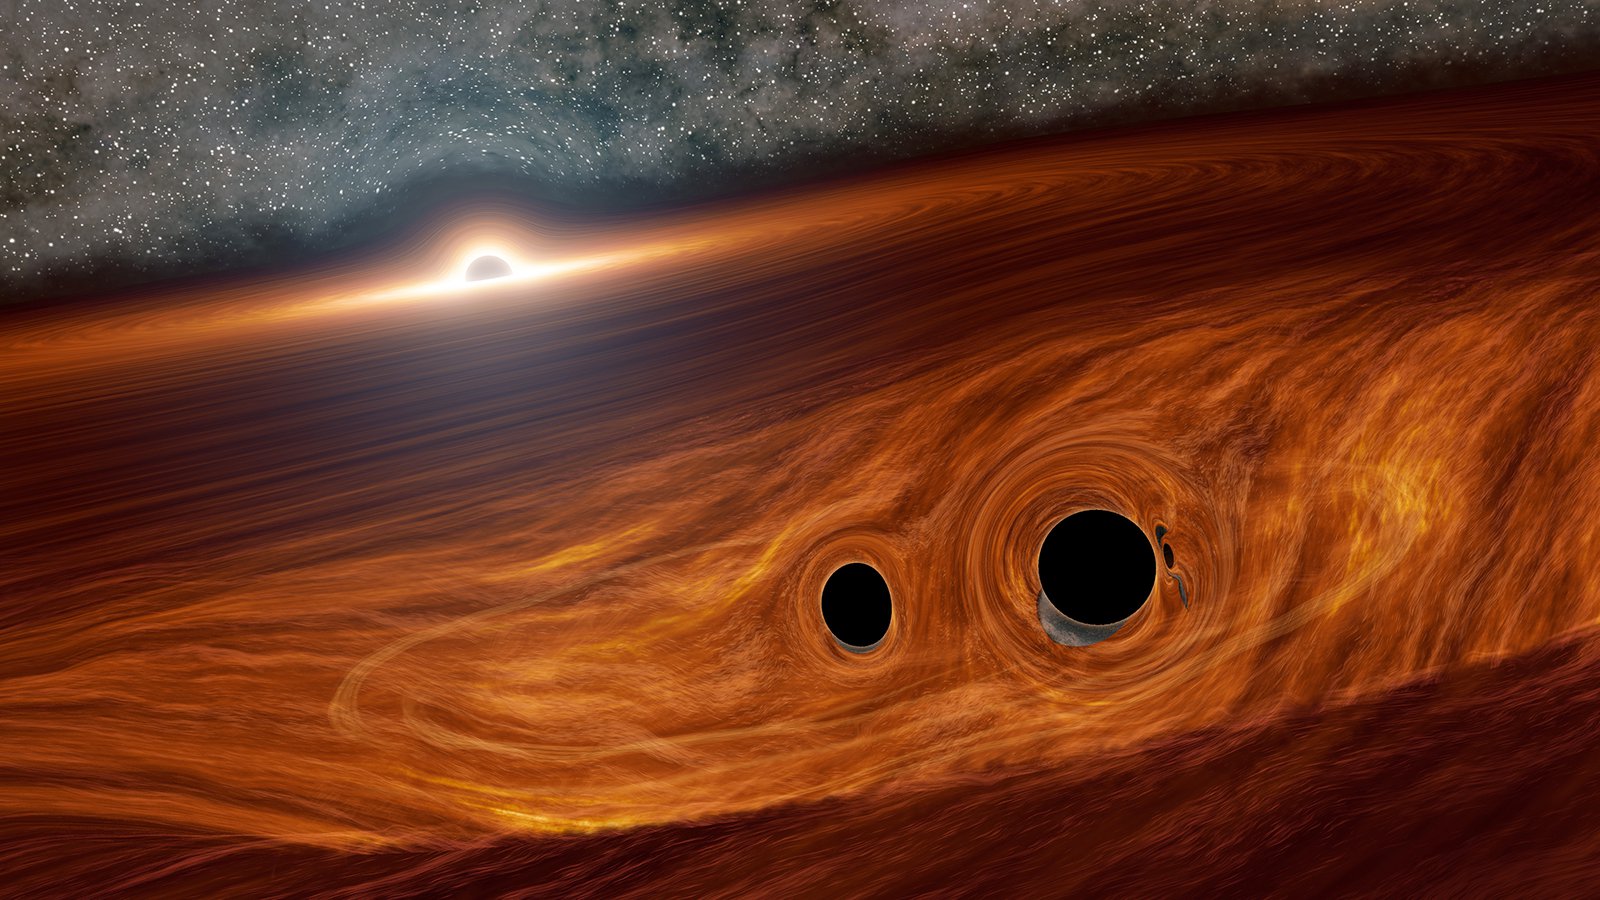 Astronomers see a hint of the gravitational-wave background of the universe